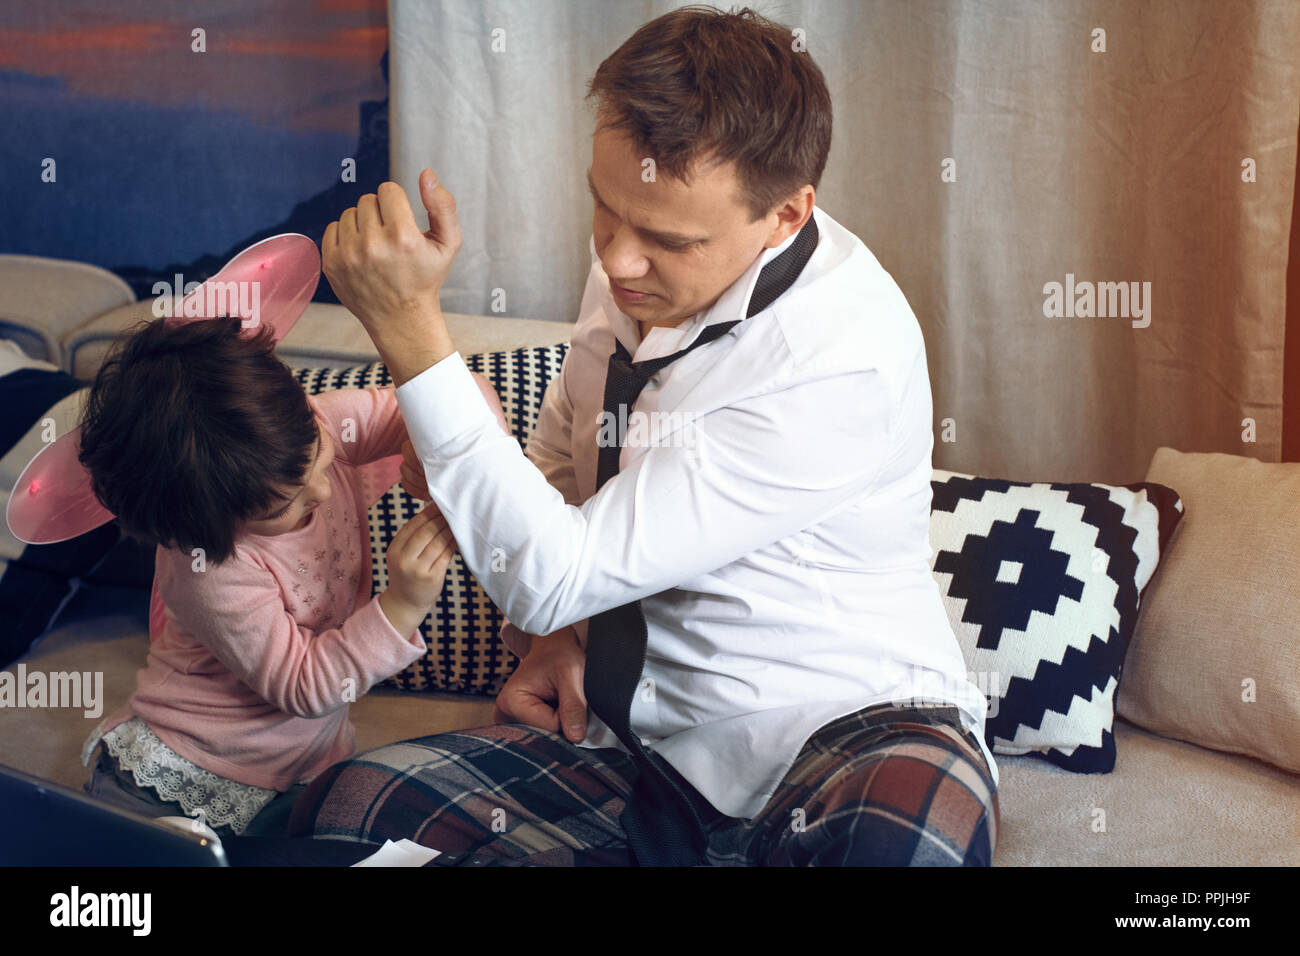 Daughter helping button father shirt Stock Photo